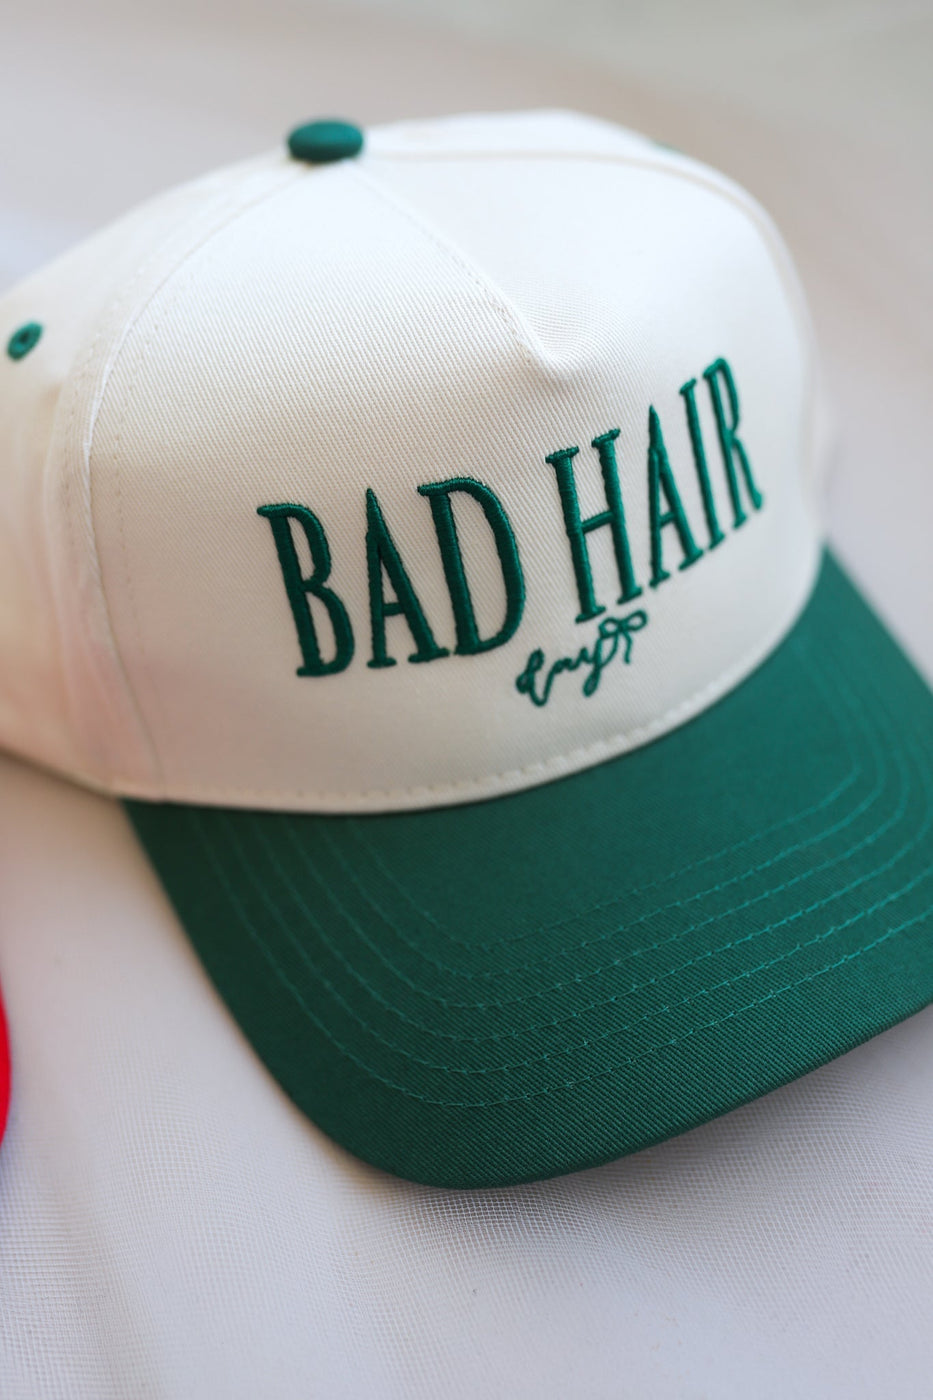 a white and green hat with text on it